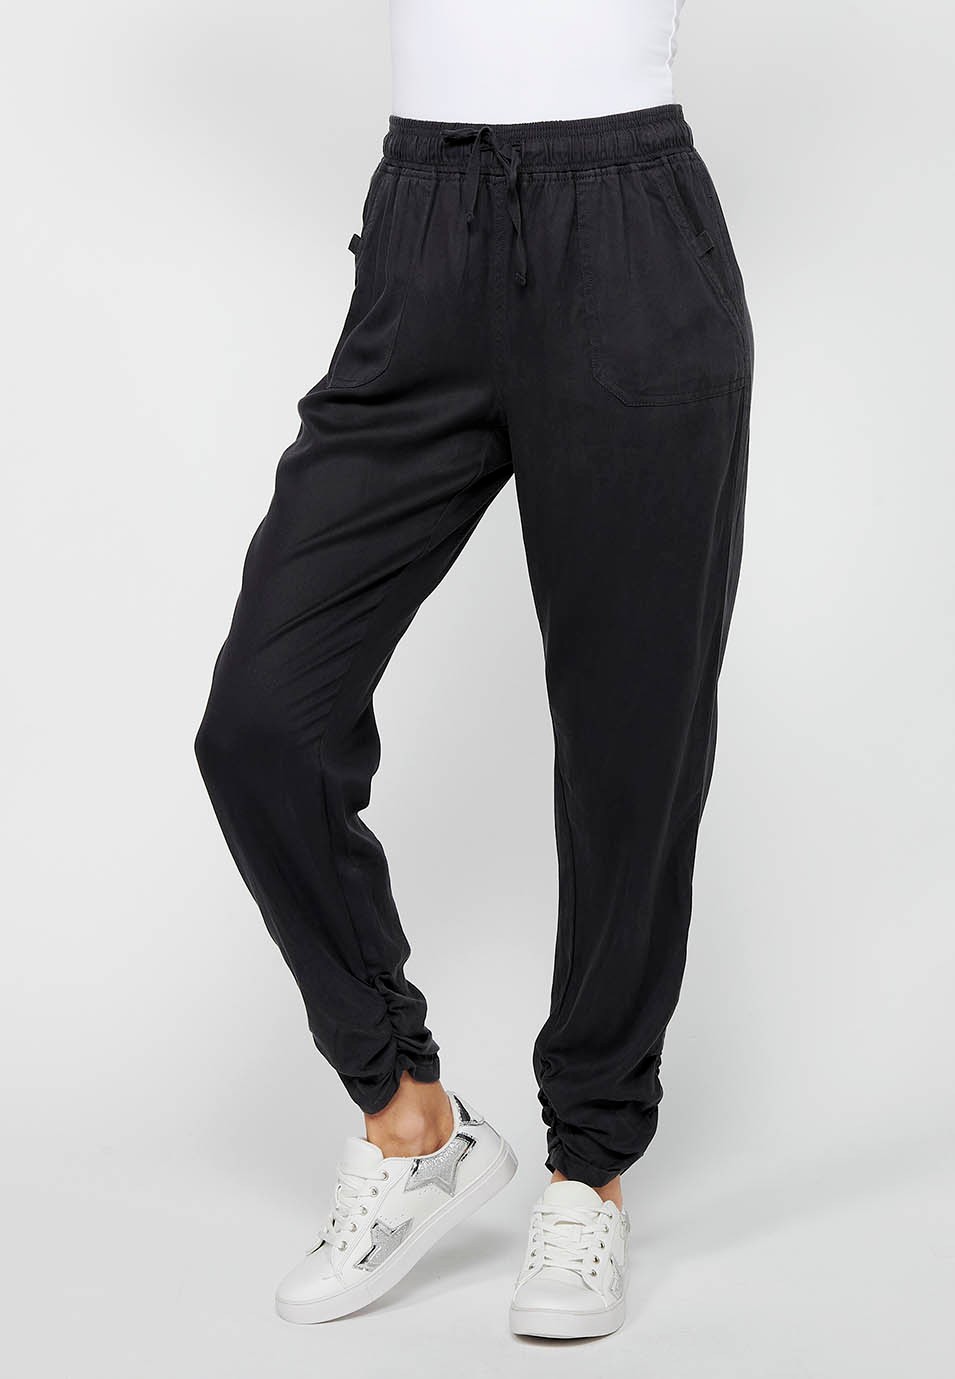 Long jogger pants with curled finish and rubberized waist with four pockets, two at the back with flap in Black for Women 2